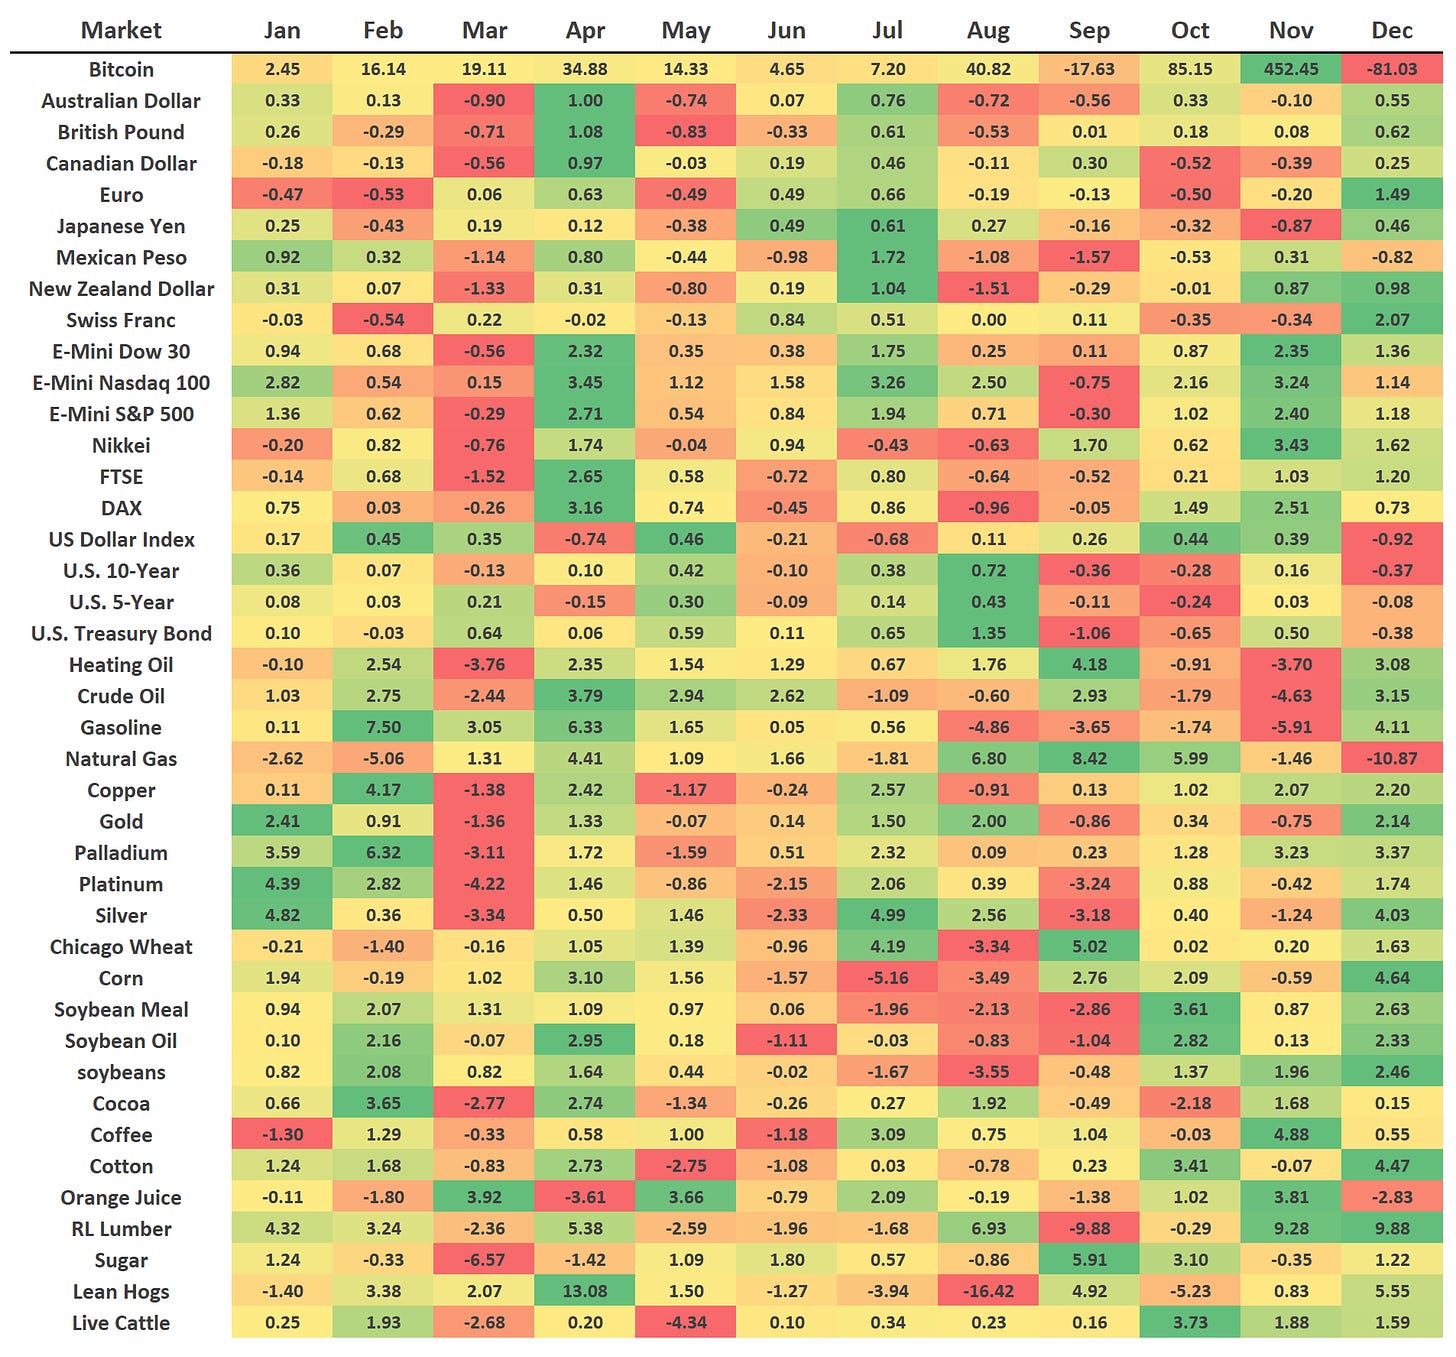 Monthly performance heatmap for Currencies, stocks, Gold, Crude and commodities